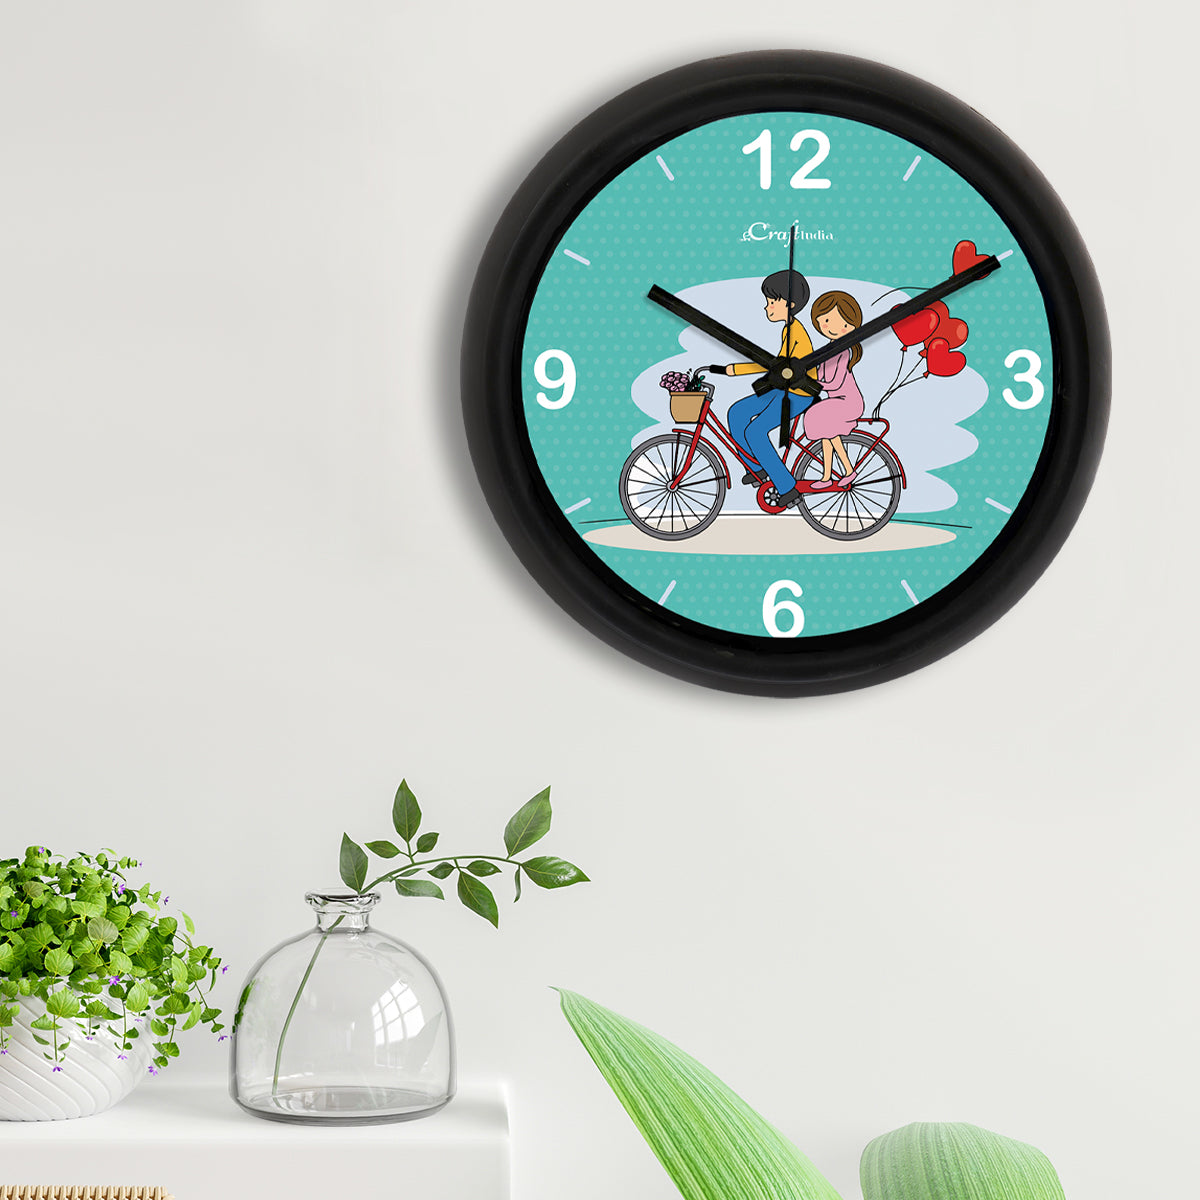 "Couple in Love Riding Bicycle" Blue Designer Round Analog Black Wall Clock 2